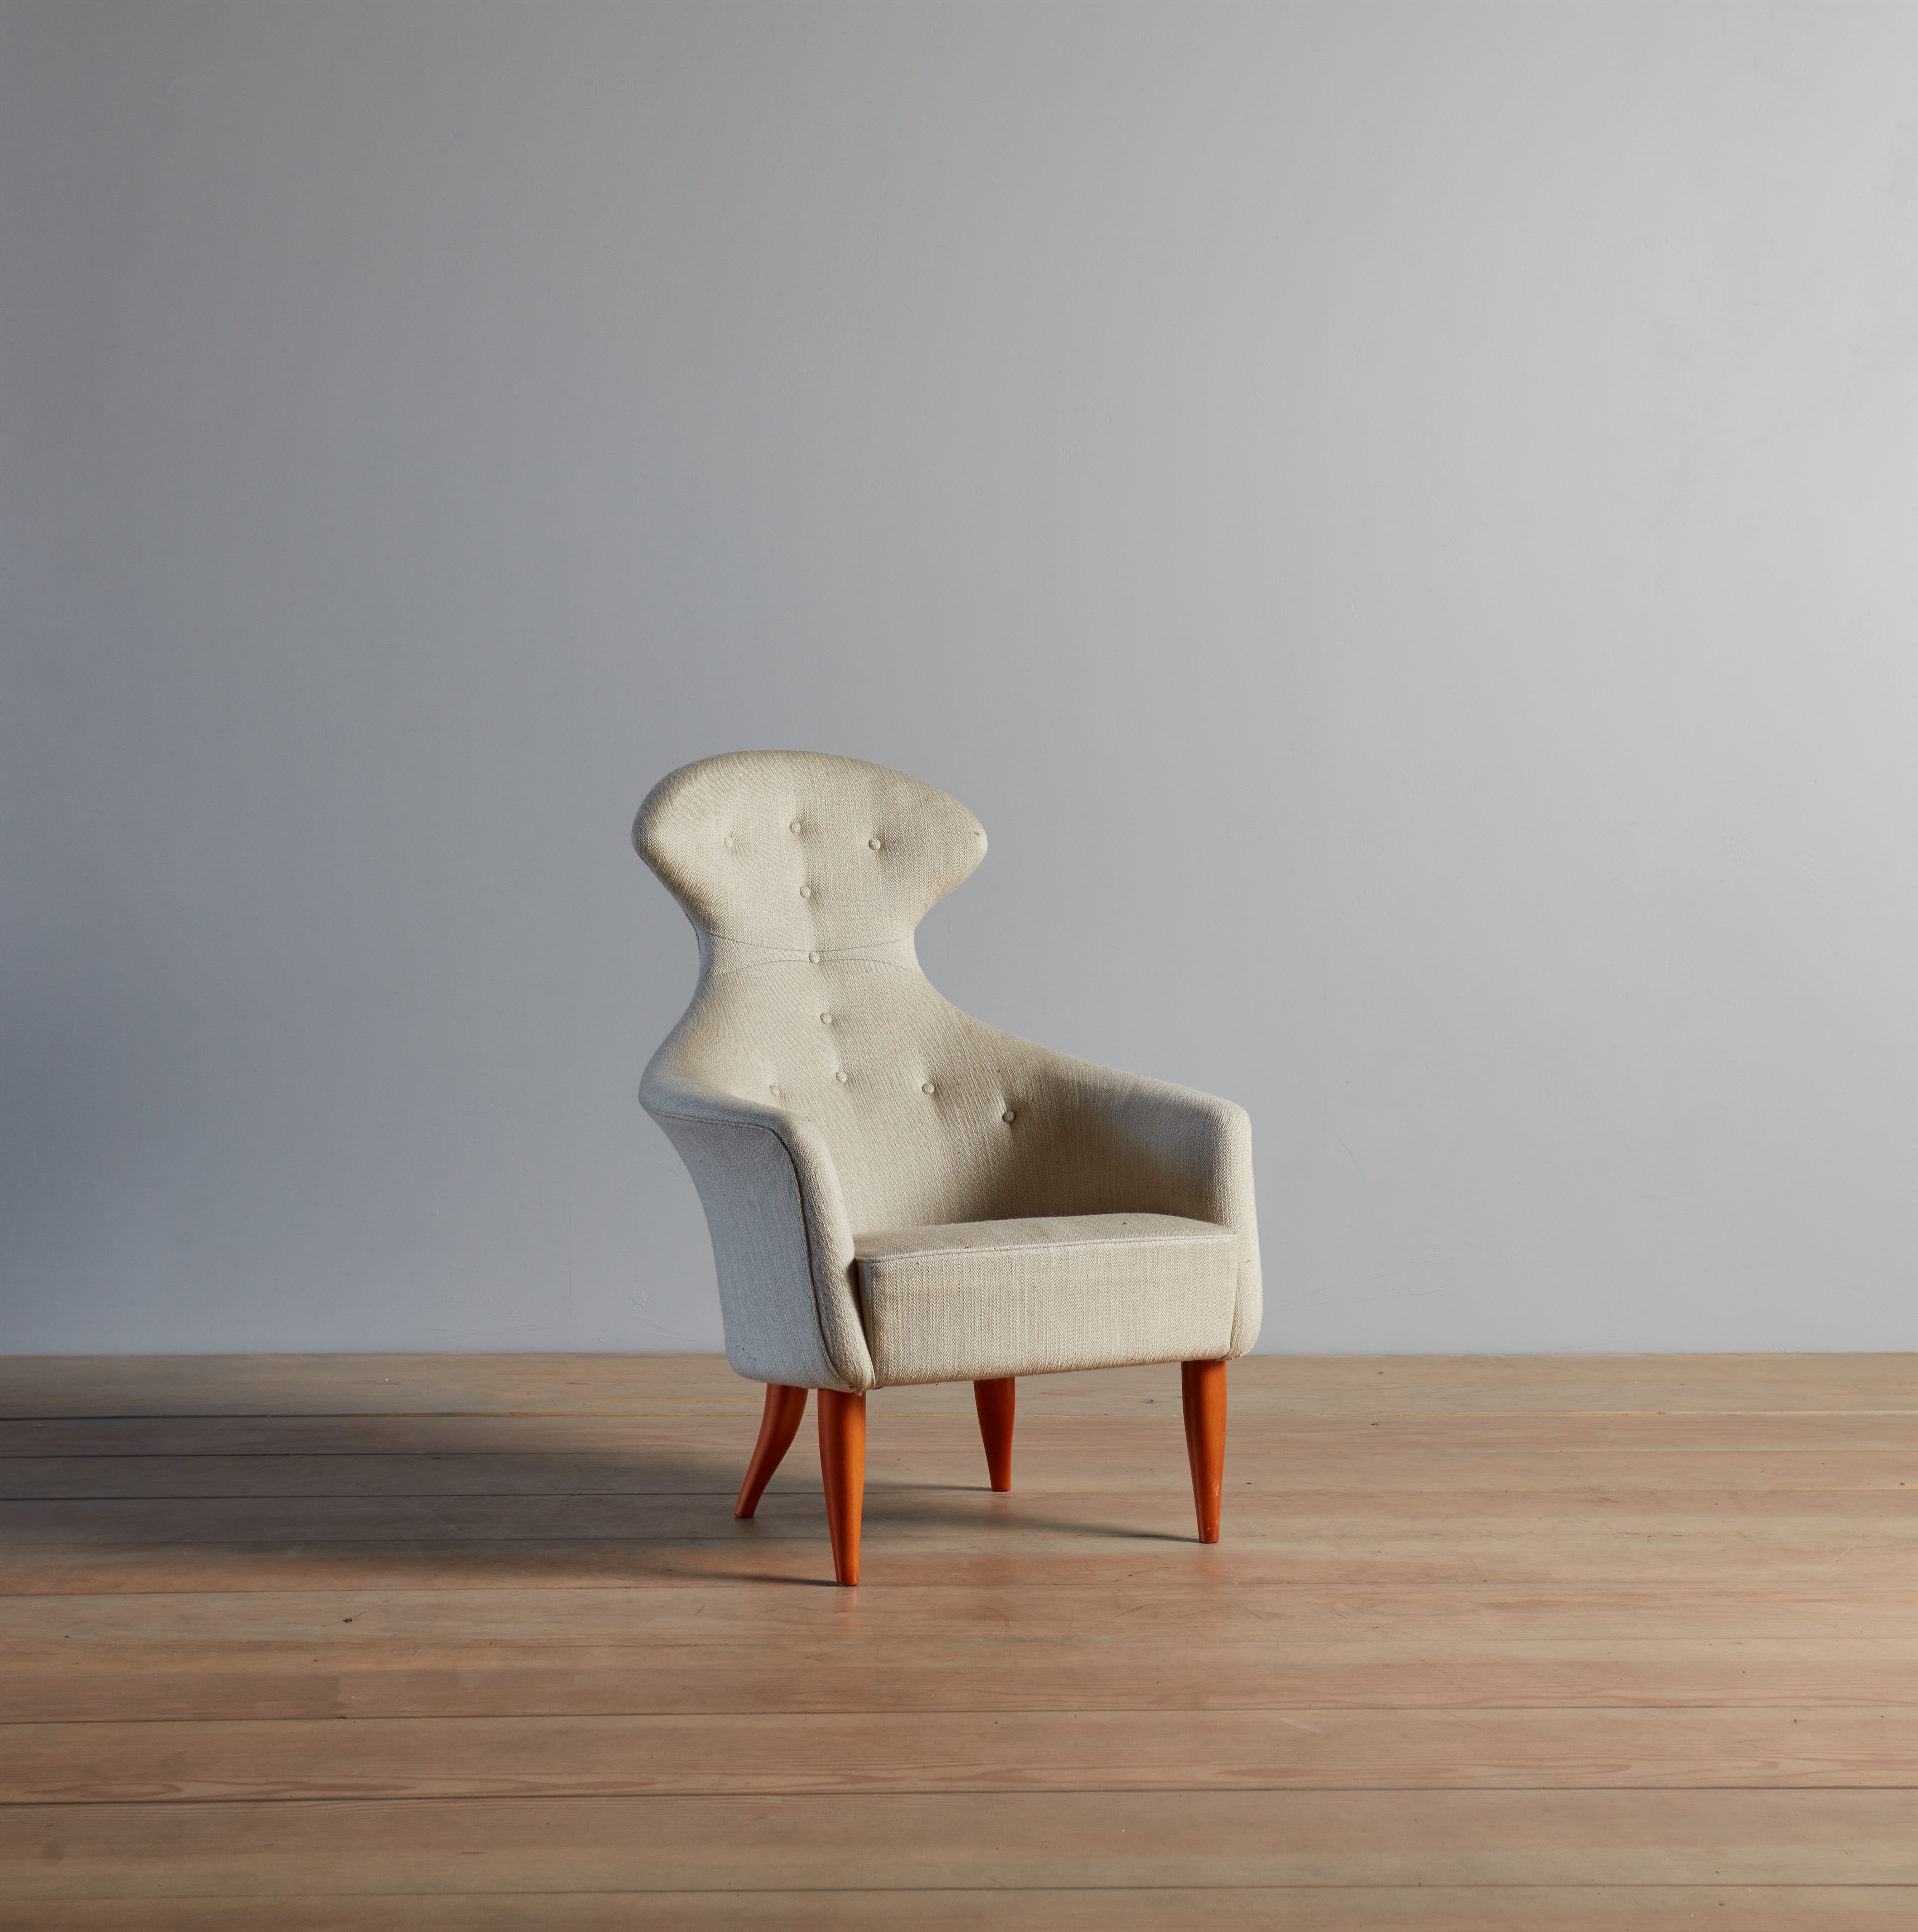 a white chair sitting on top of a wooden floor